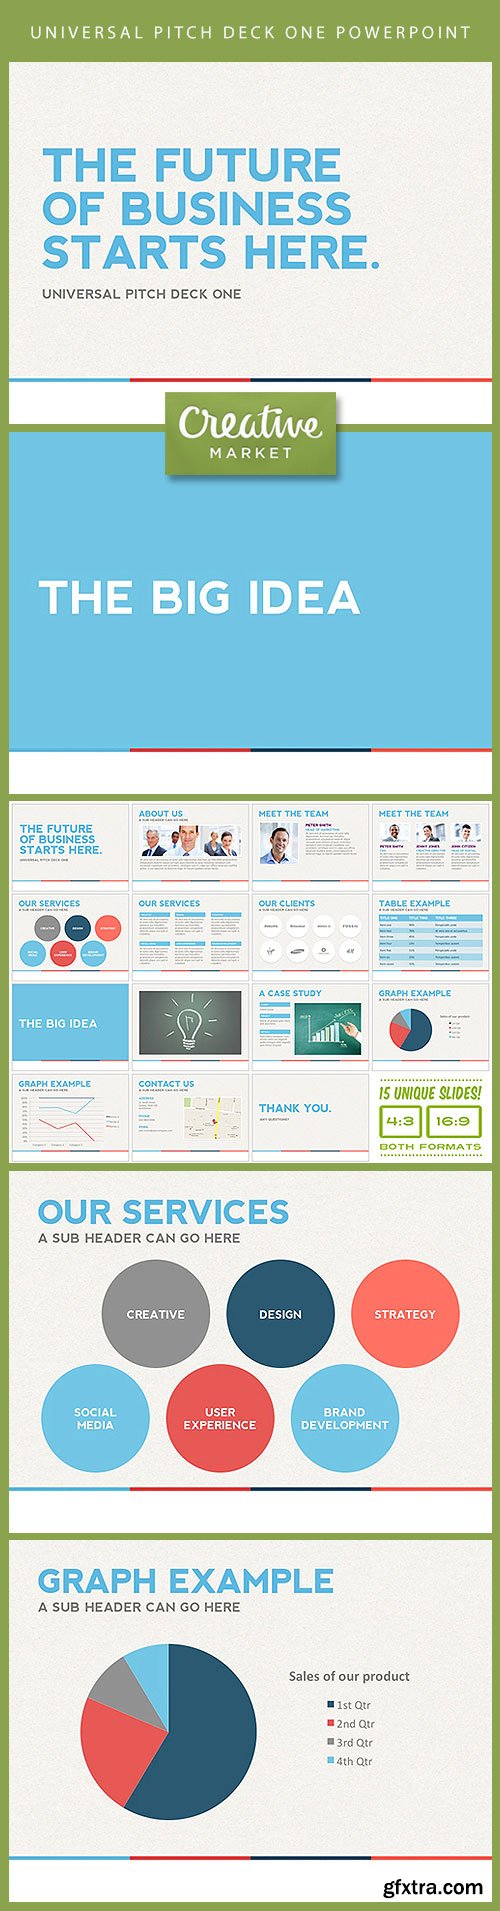 Universal Pitch Deck One PowerPoint CM 2426